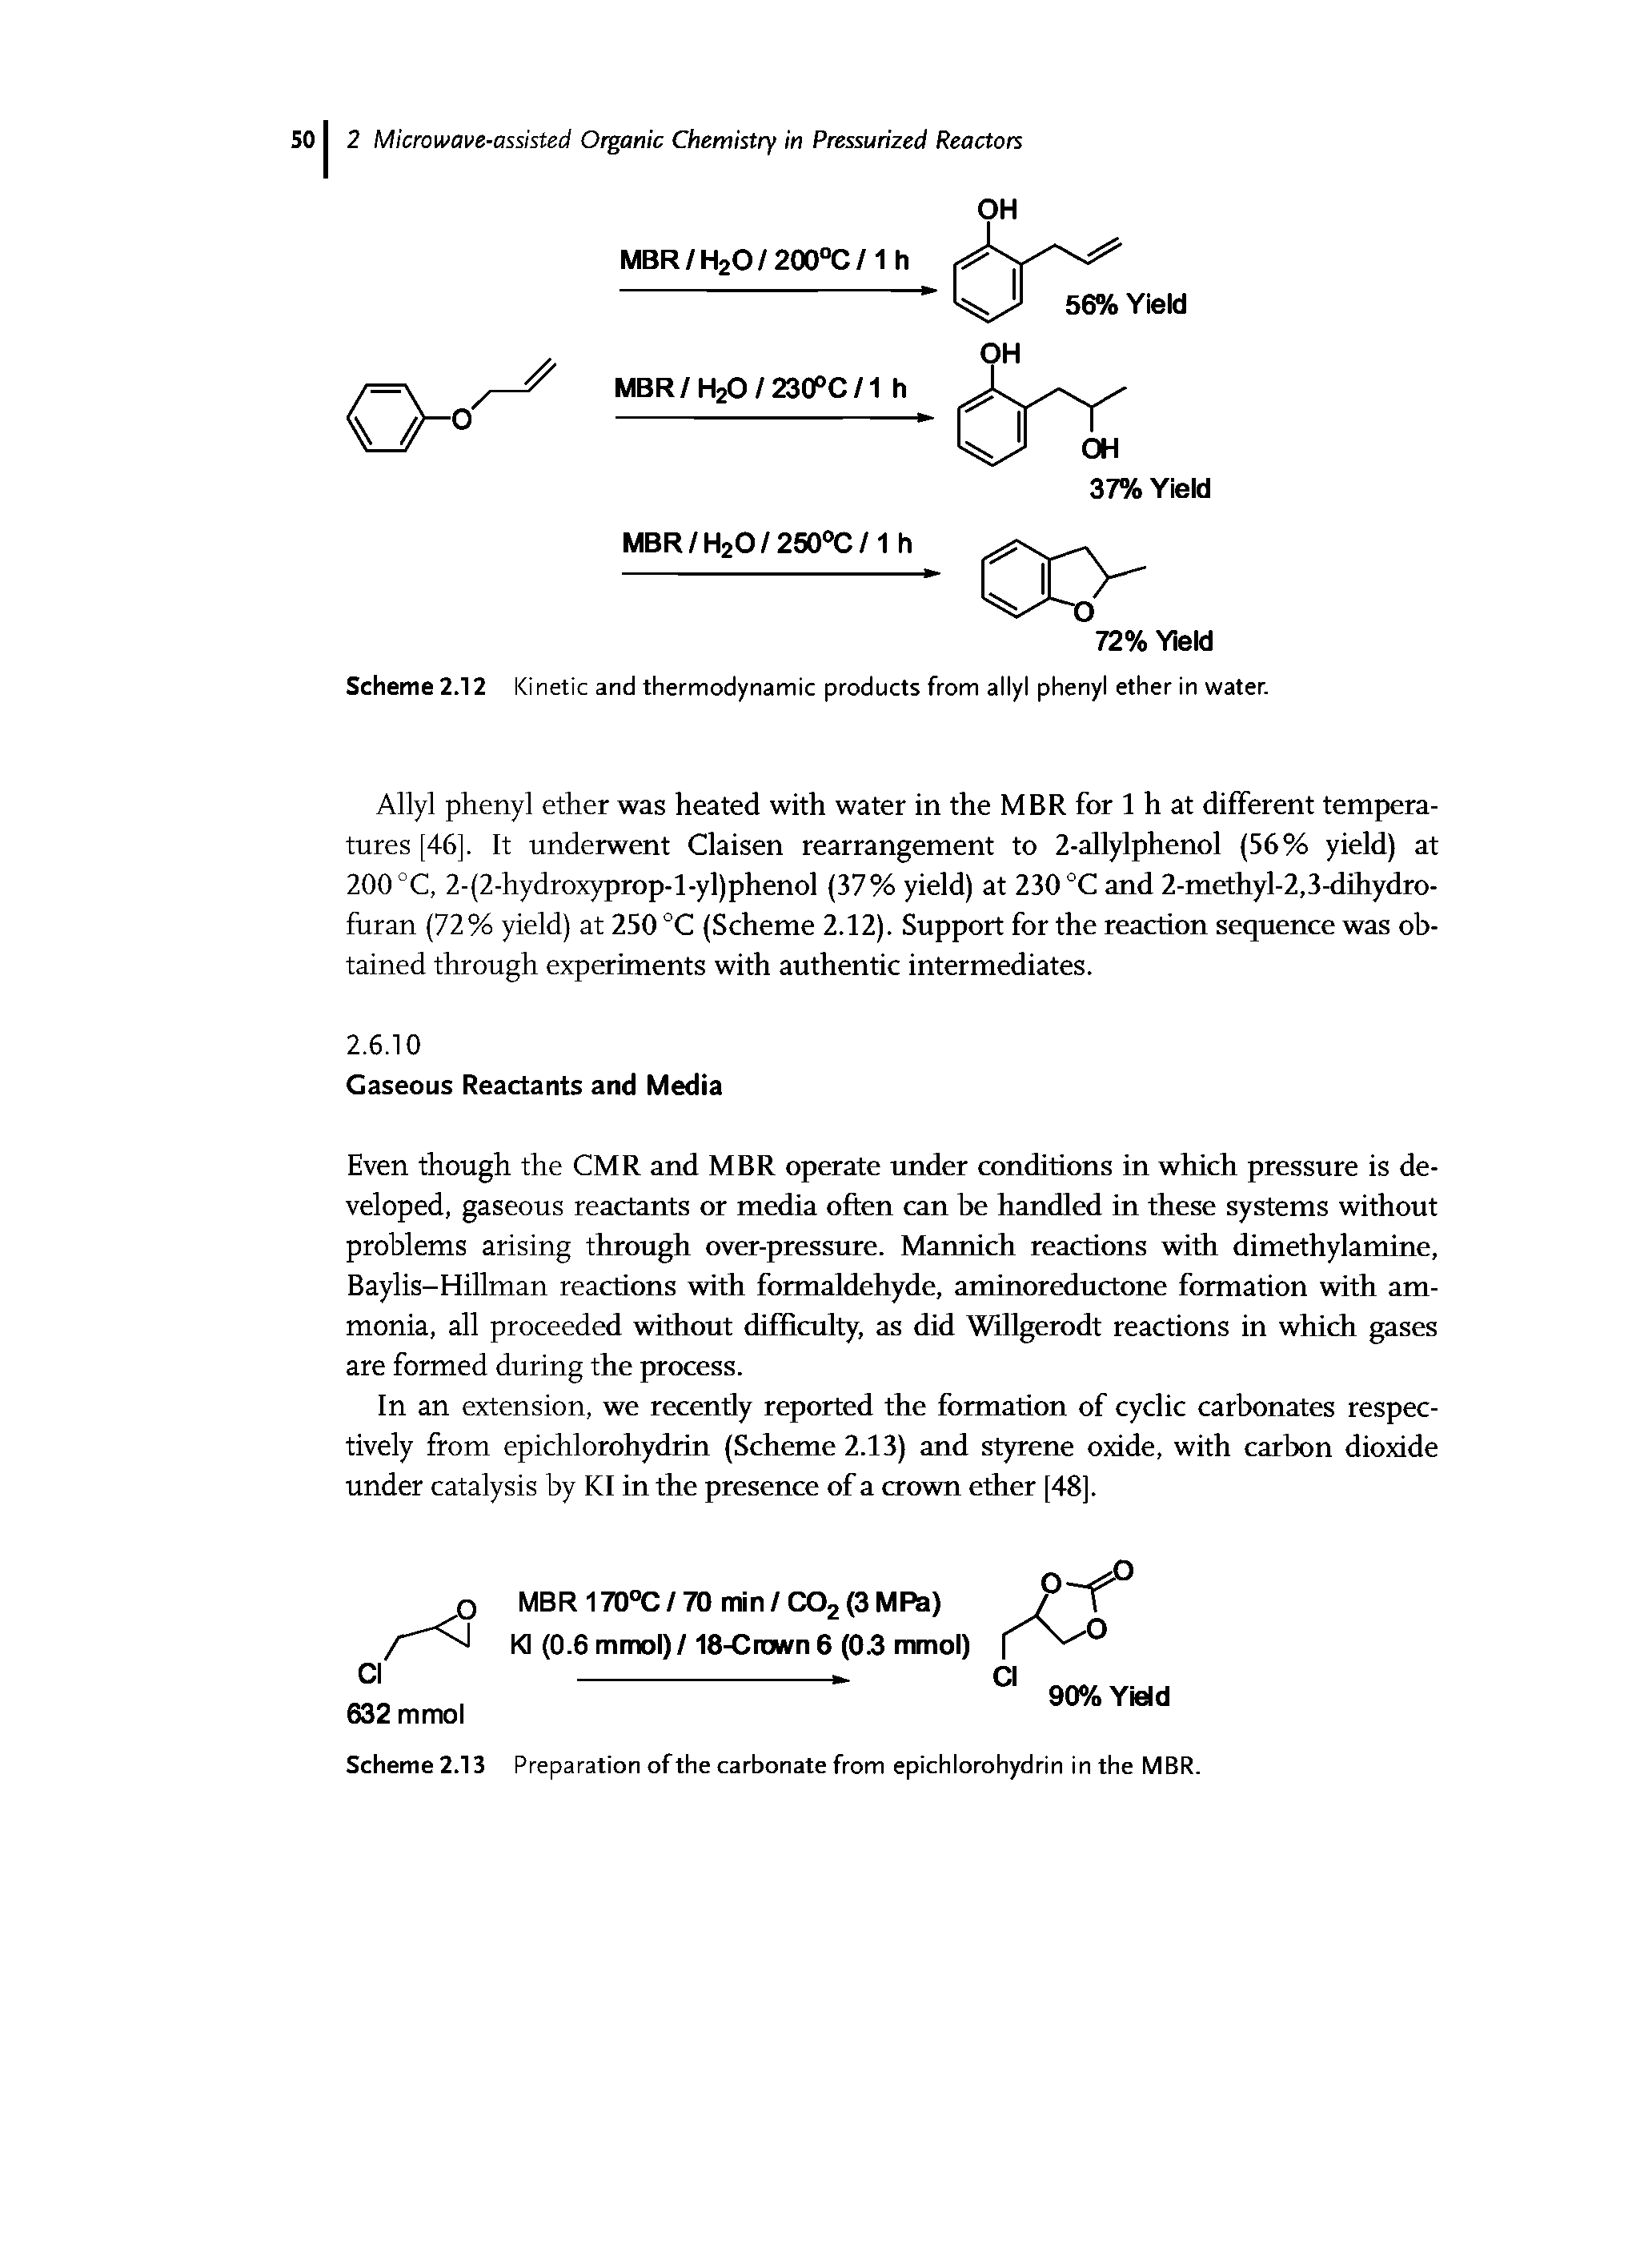 Scheme 2.13 Preparation of the carbonate from epichlorohydrin inthe MBR.